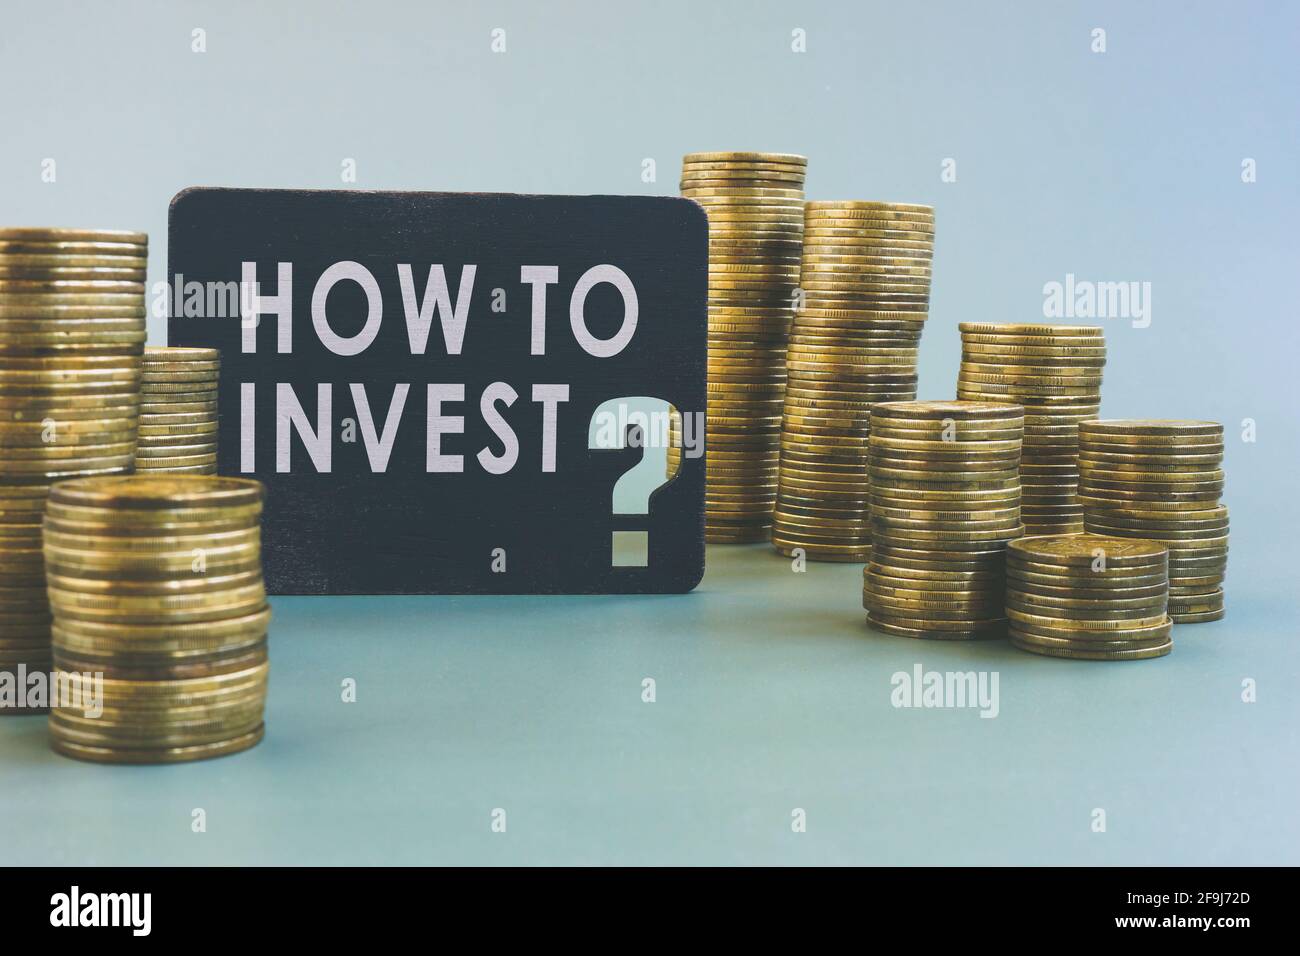 How to invest questions and stack of coins. Stock Photo